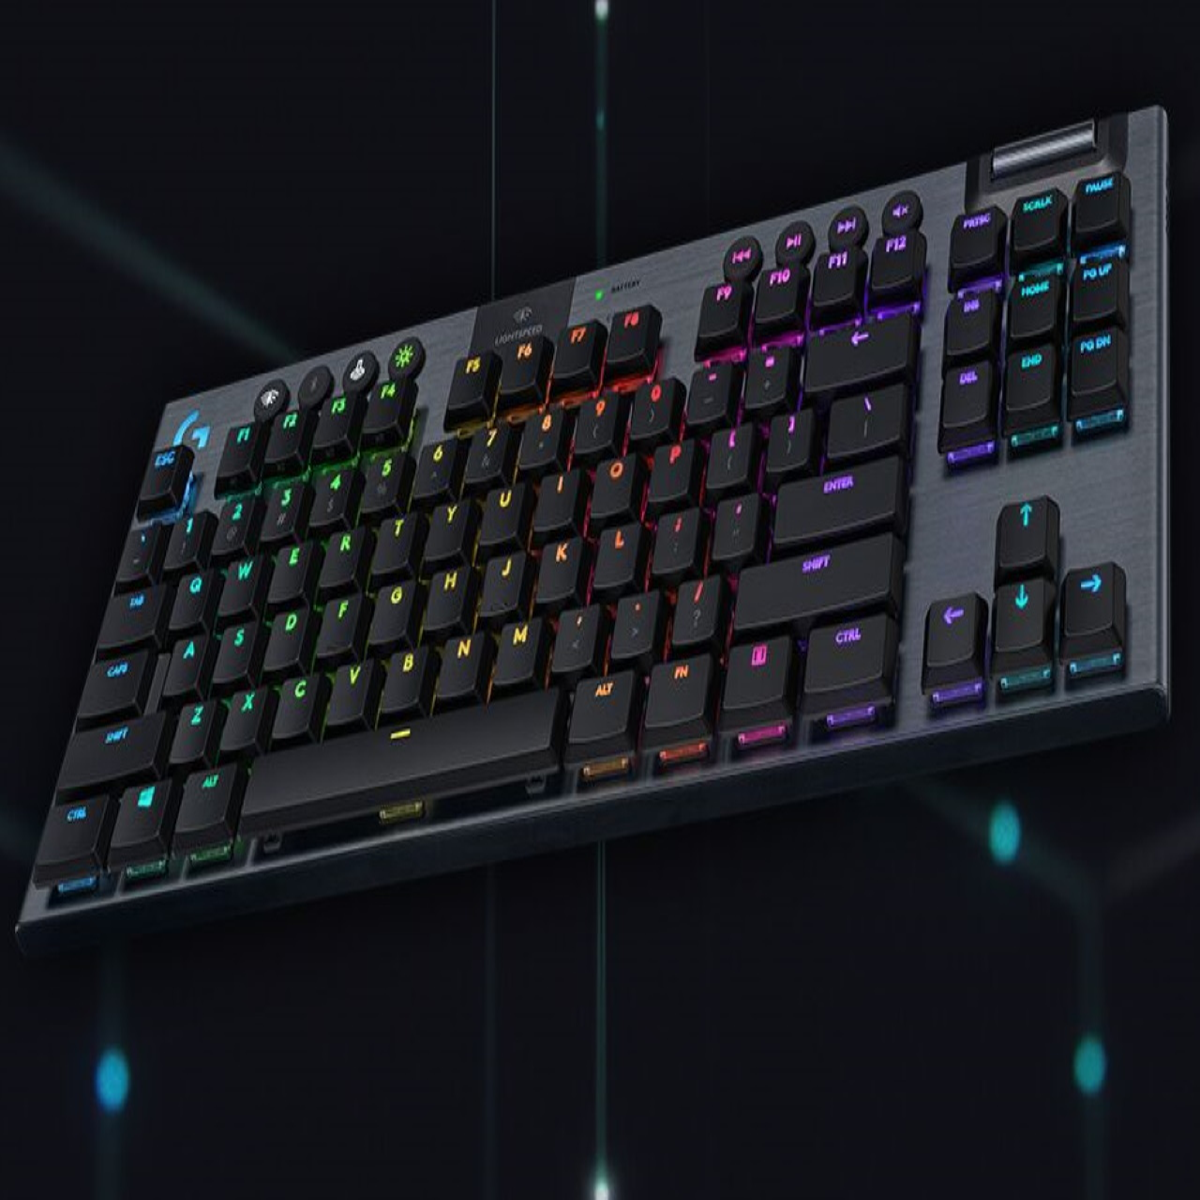 Logitech G Introduces G915 TKL, a More Compact Tenkeyless Gaming Keyboard